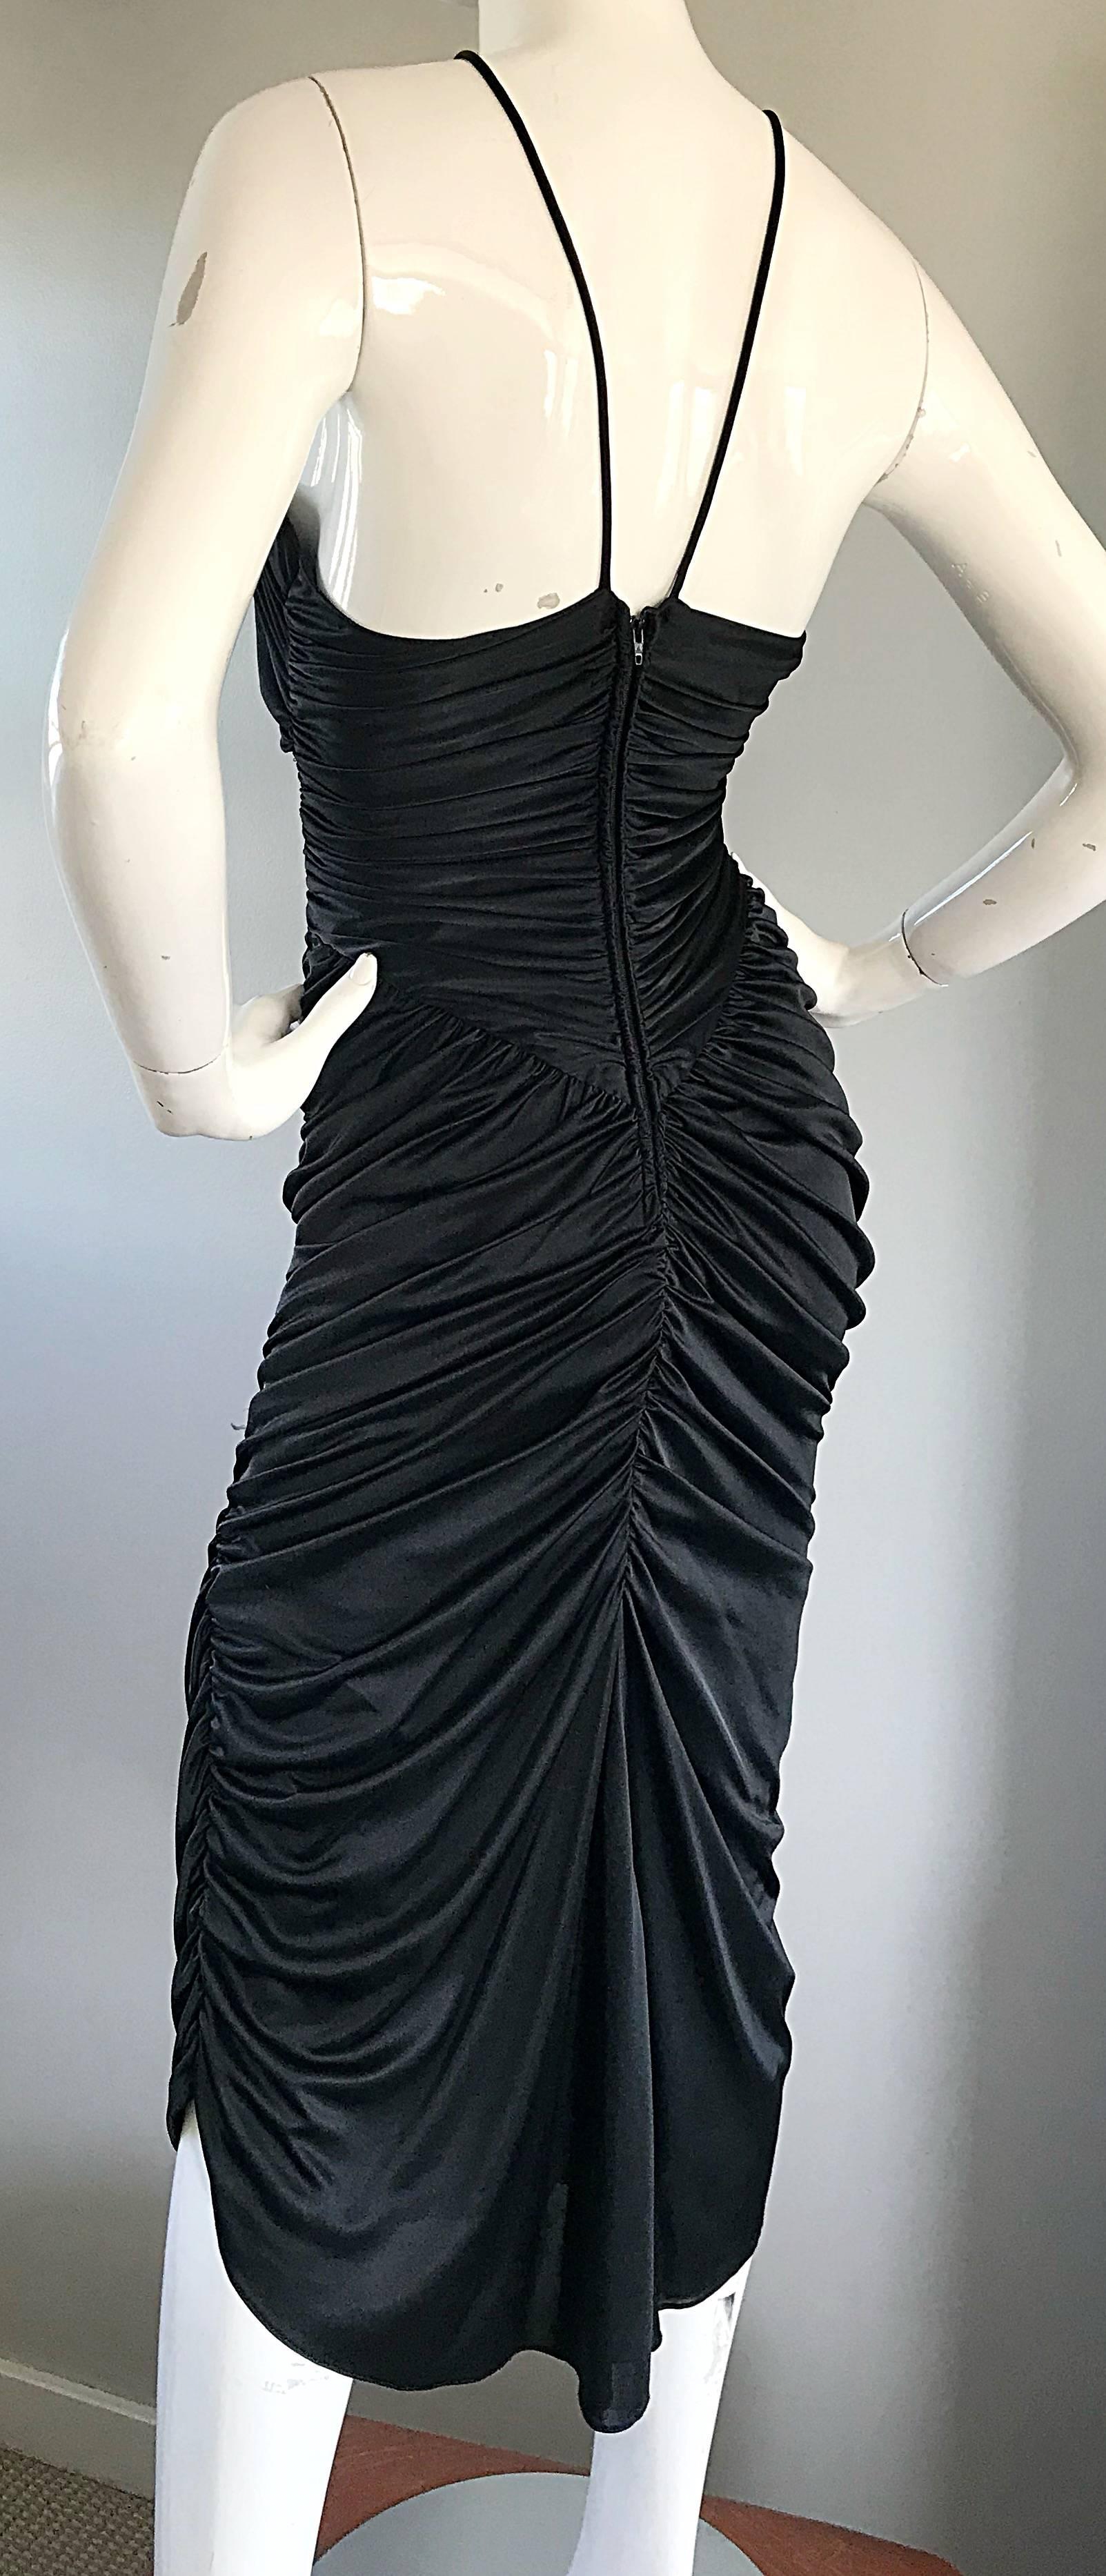 1980s Vintage Samir Black Beaded + Pearl + Rhinestone Sexy Ruched 80s Dress For Sale 4